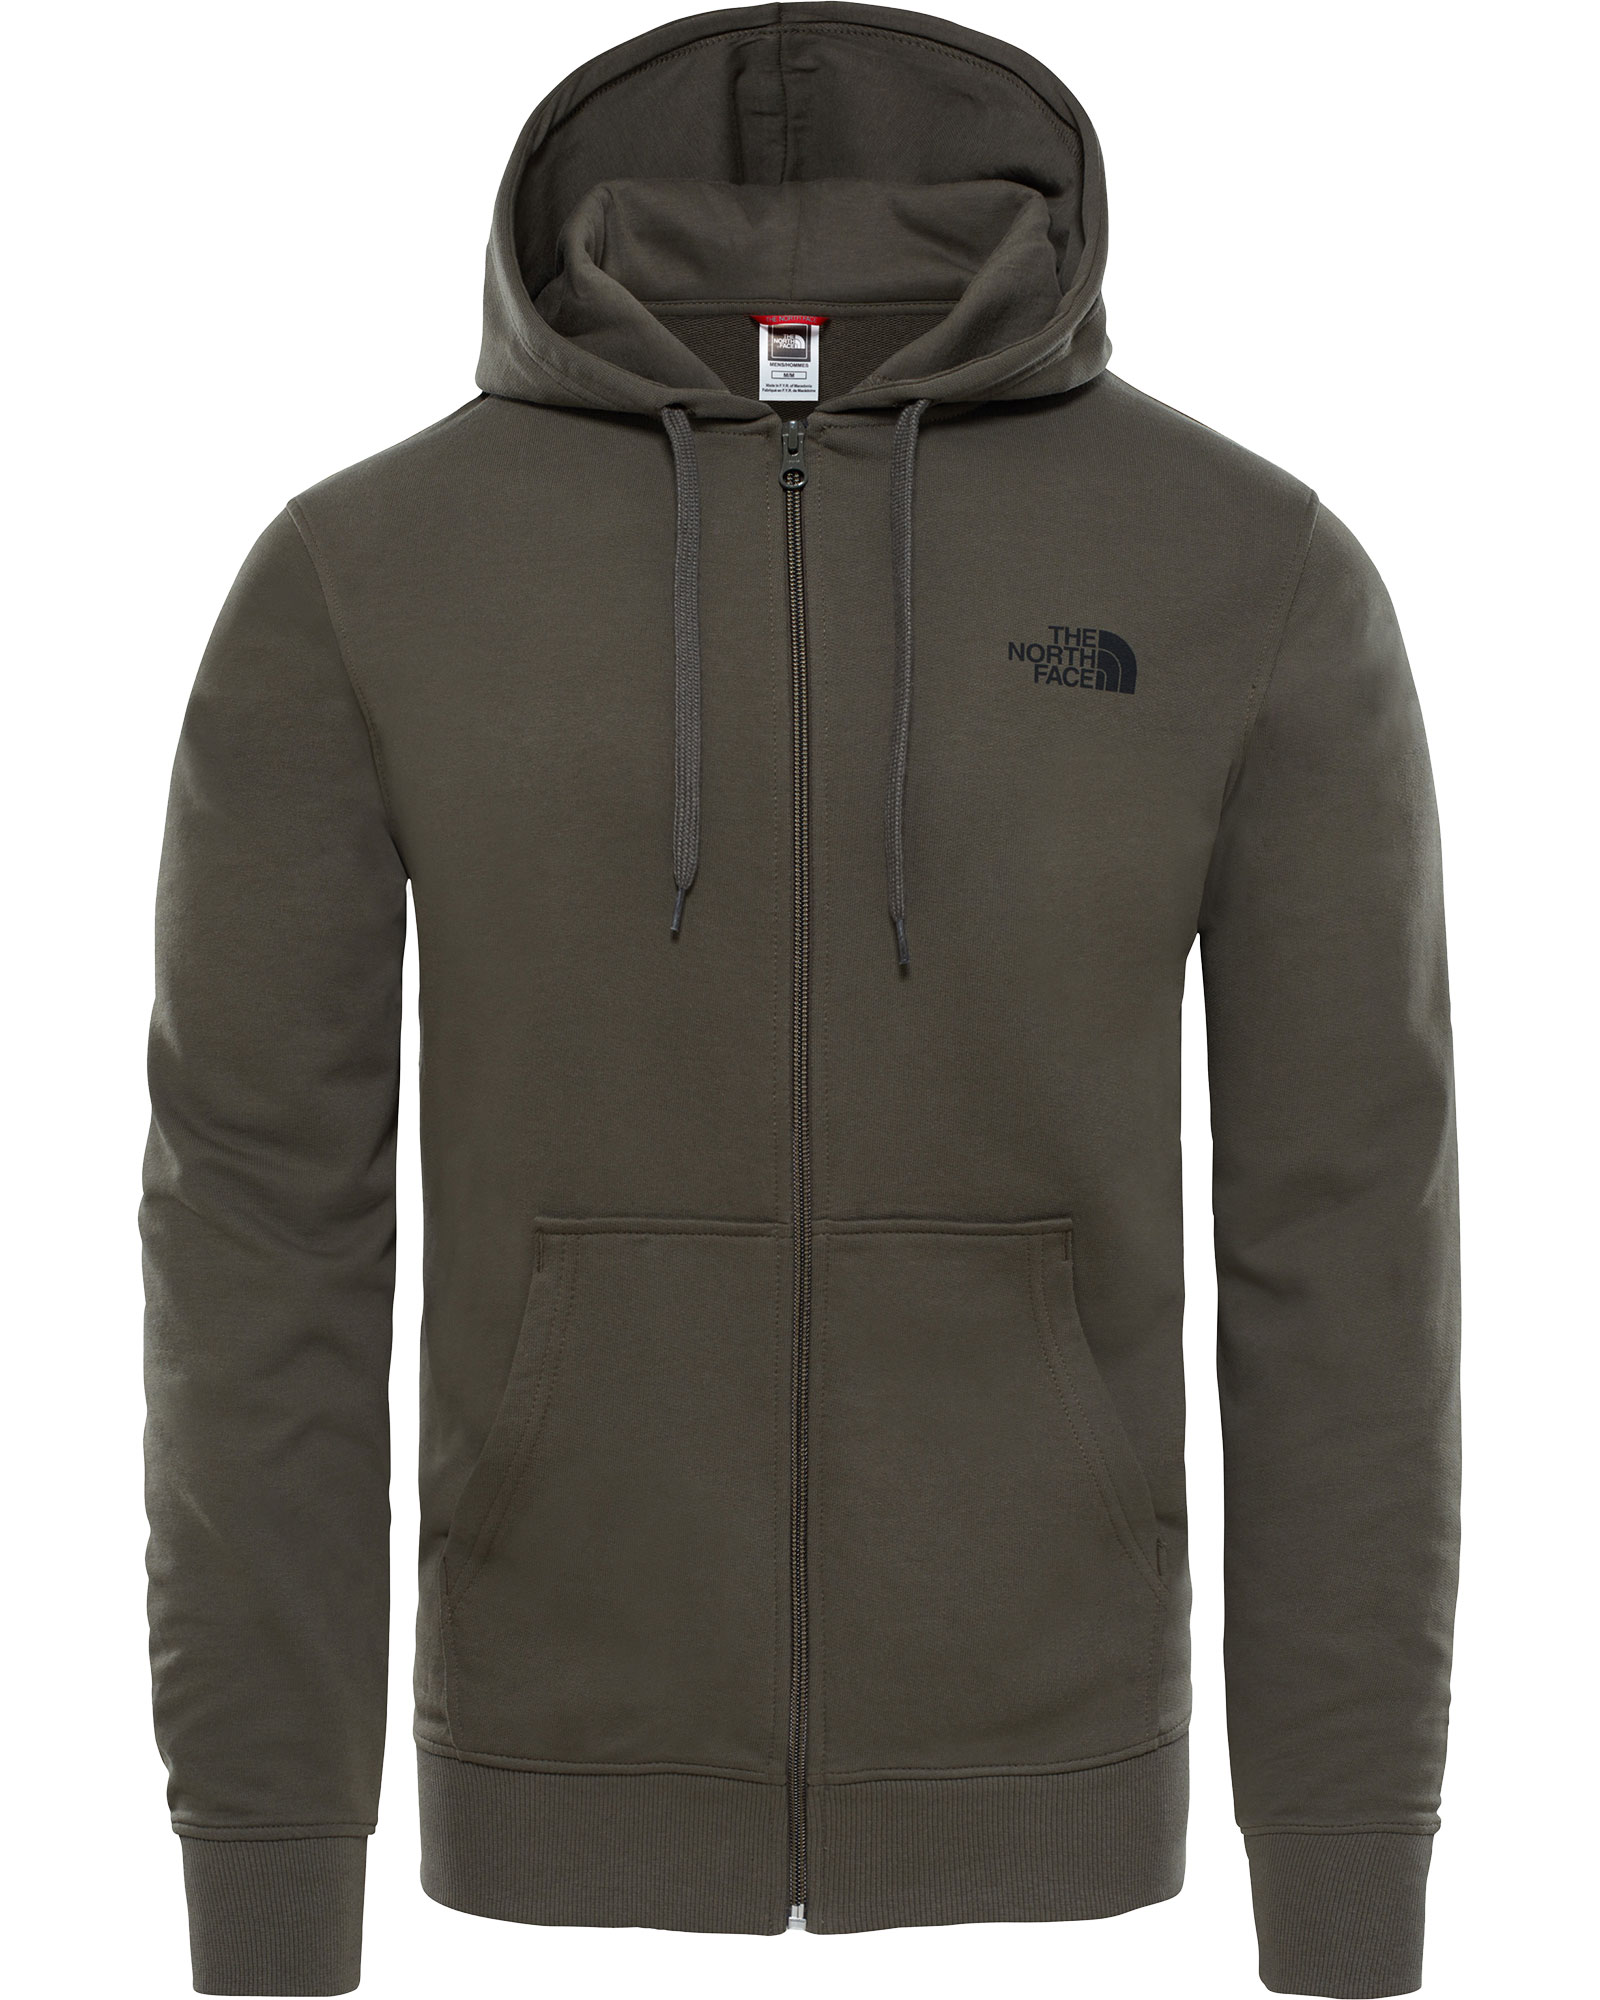 The North Face Open Gate Men’s Full Zip Hoodie - New Taupe Green M